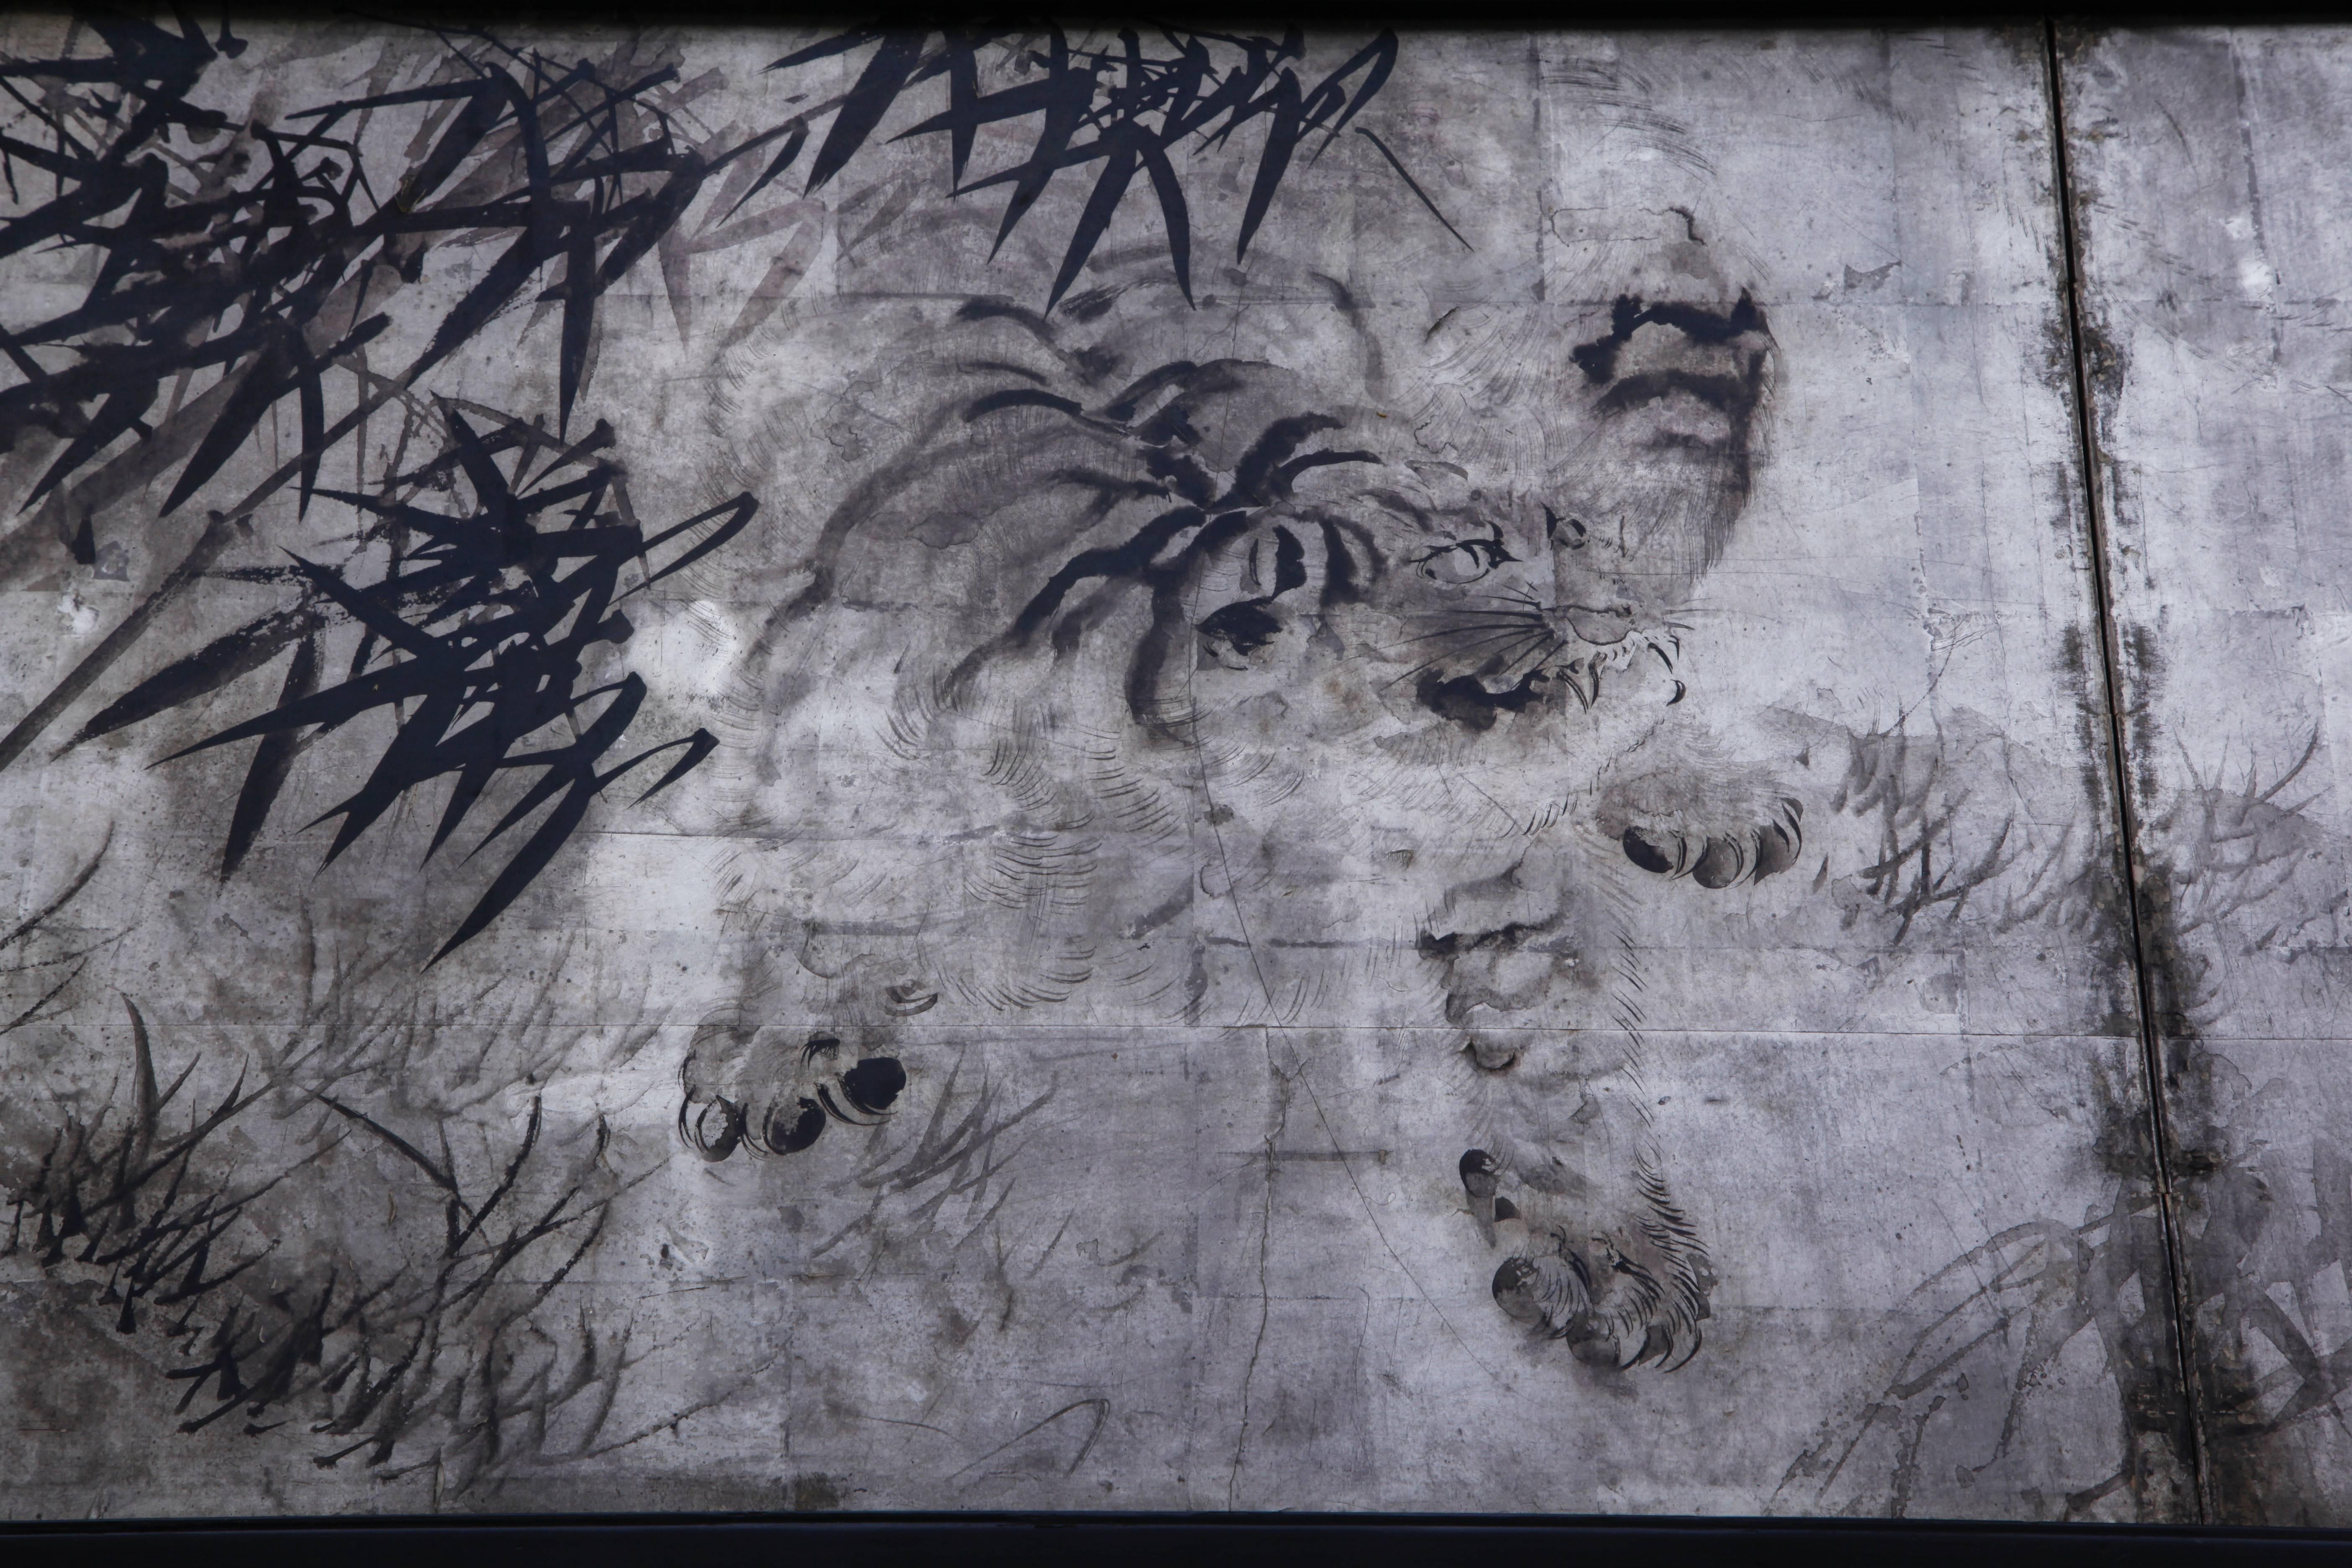 A captivating two-fold paper screen, painted in black ink on silver ground, dated Spring 1912. The subject, a tiger crouching in bamboo, is portrayed with a spontaneous, natural energy; his mouth parted, tail switching, the bamboo leaves conveyed in